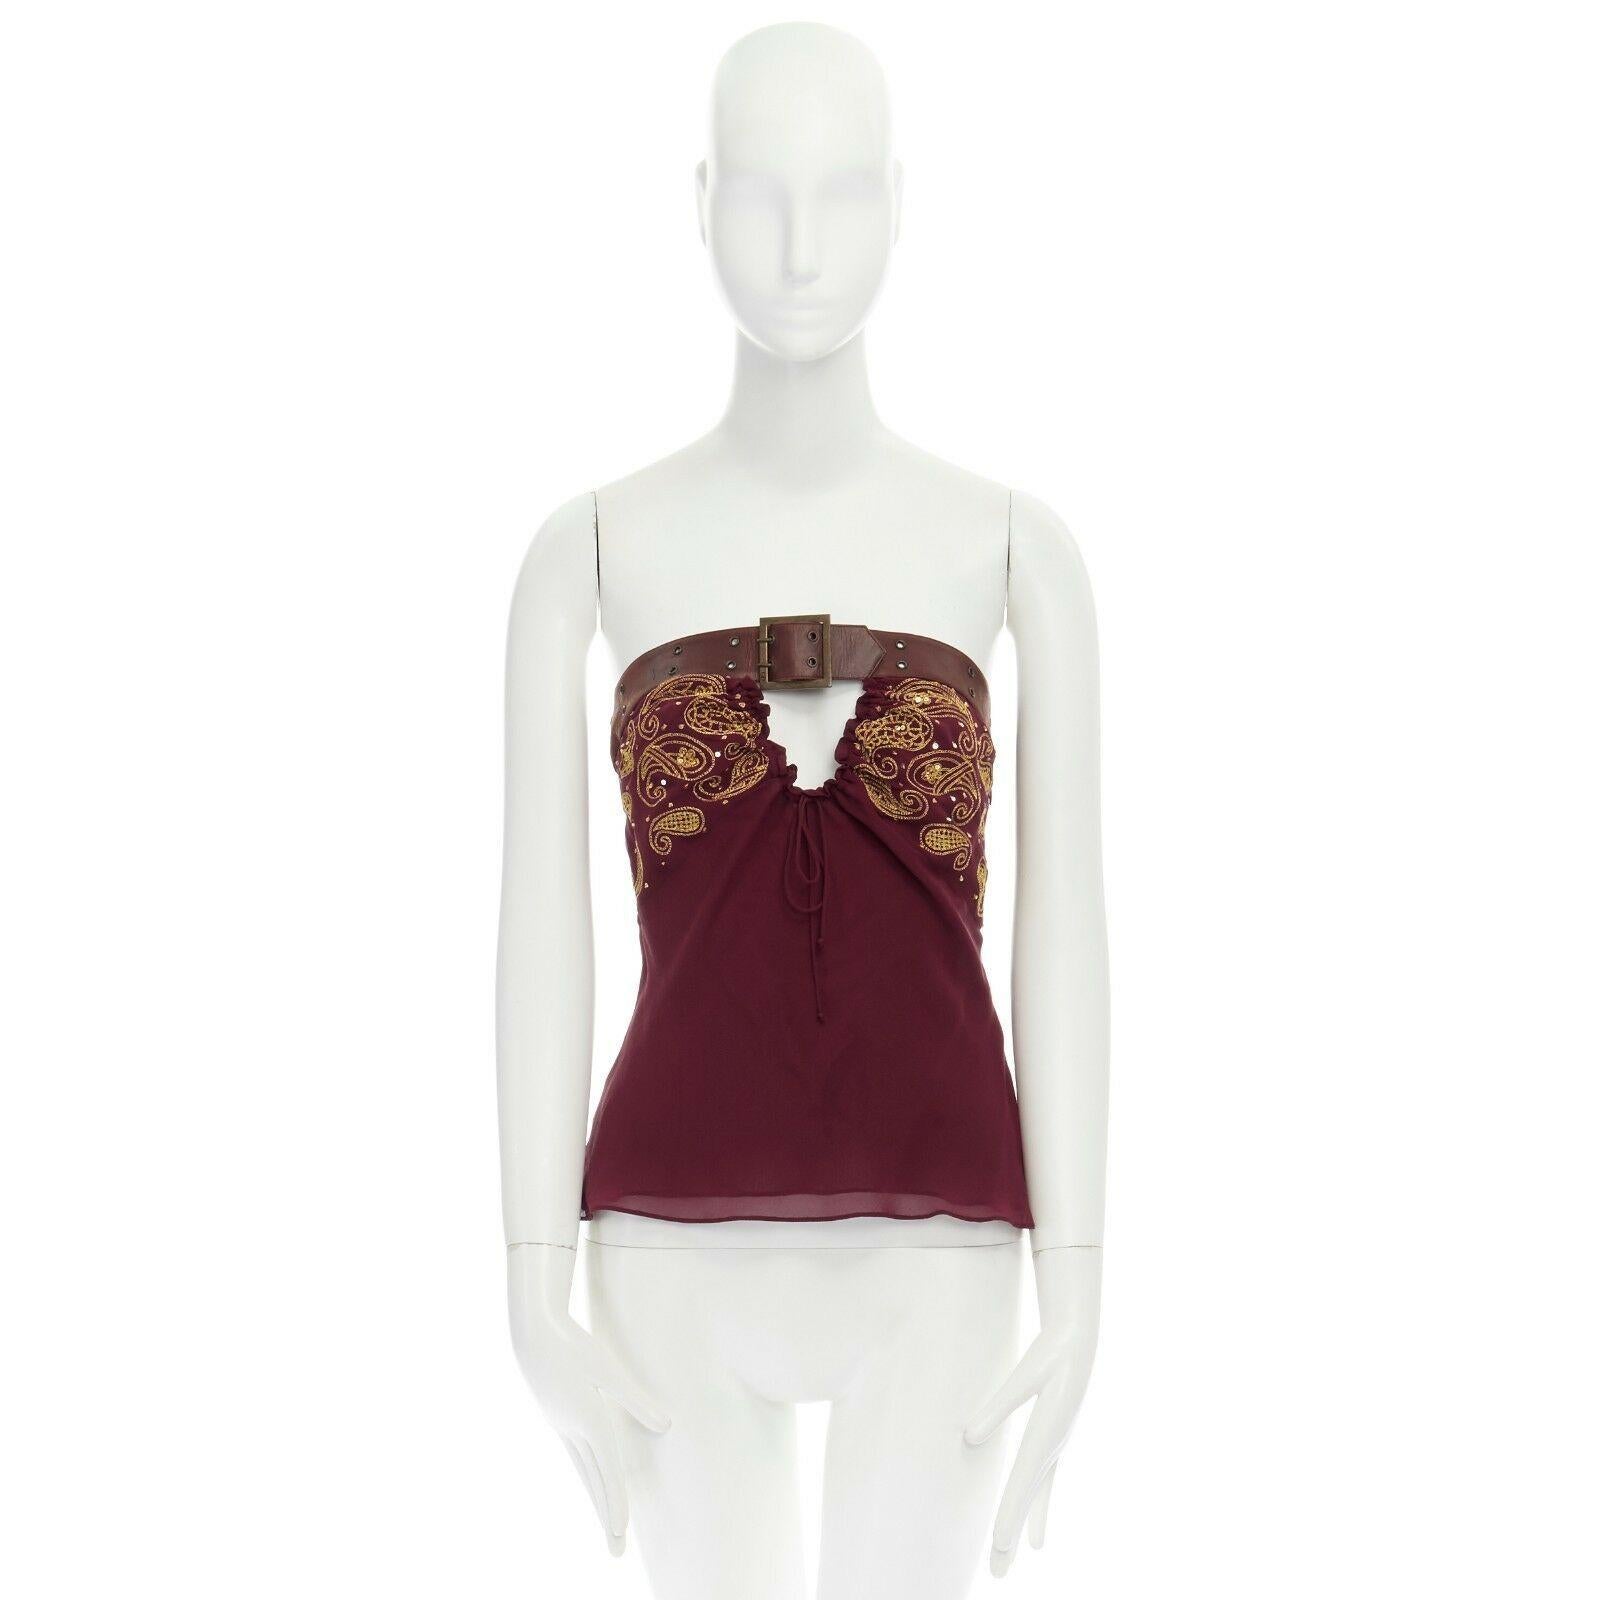 runway CHRISTIAN DIOR GALLIANO AW02 belted embroidered silk top FR38 US6

CHRISTIAN DIOR BY JOHN GALLIANO
FROM THE FALL WINTER 2002 RUNWAY AND CAMPAIGN
SILK, LAMBSKIN LEATHER . BROWN GROMMET STUDDED BELT DETAIL ON BUST . 
ADJUSTABLE DUAL PRONG